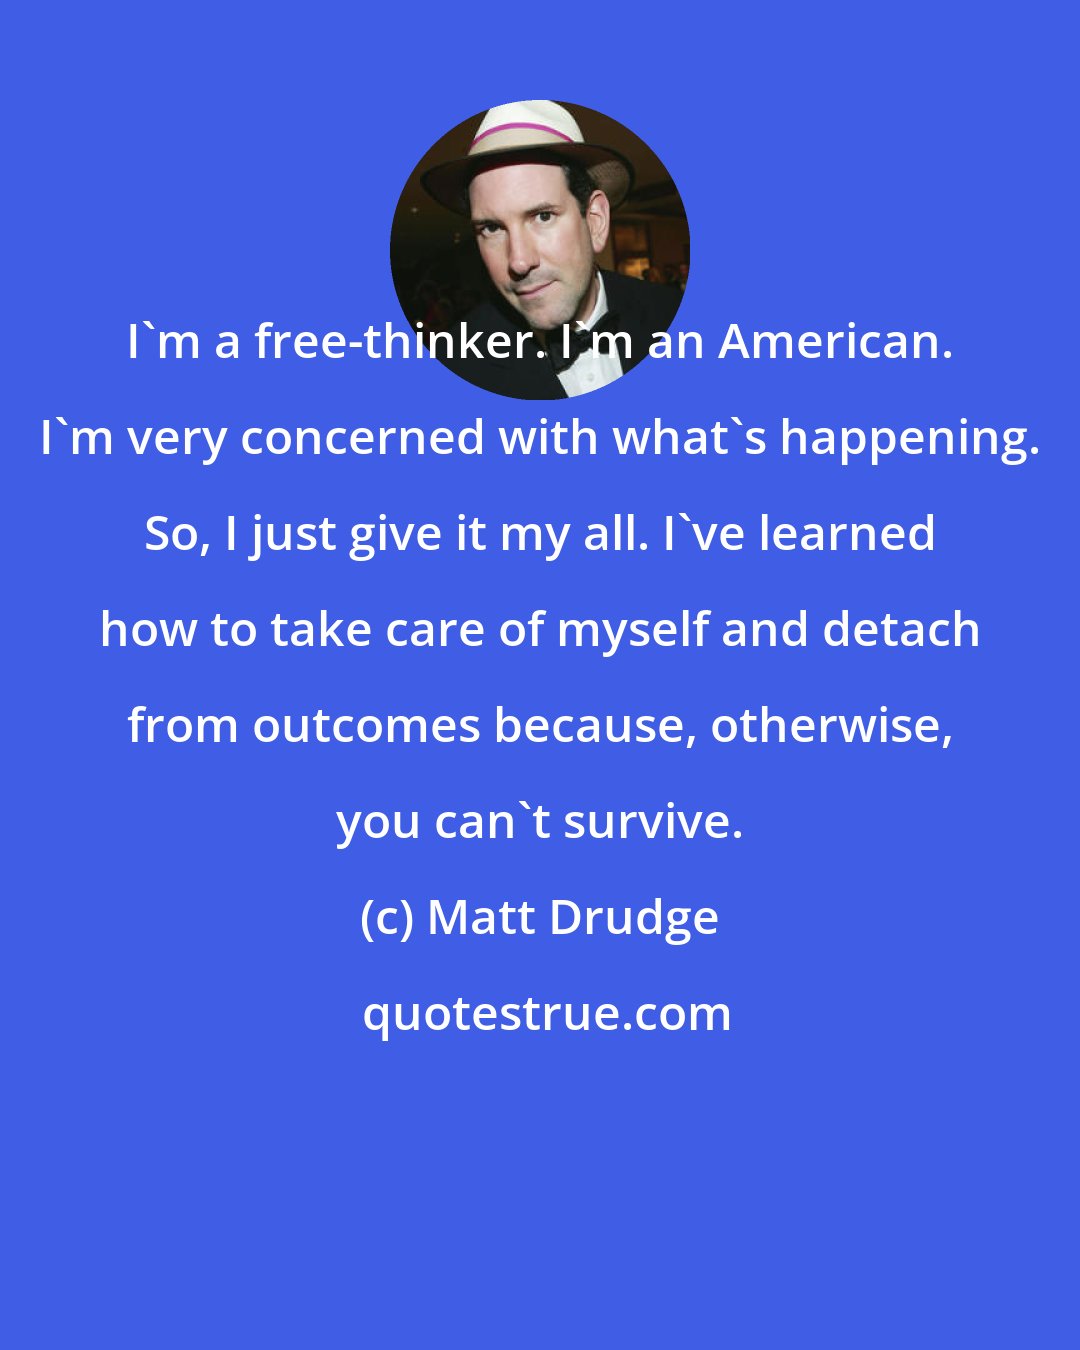 Matt Drudge: I'm a free-thinker. I'm an American. I'm very concerned with what's happening. So, I just give it my all. I've learned how to take care of myself and detach from outcomes because, otherwise, you can't survive.